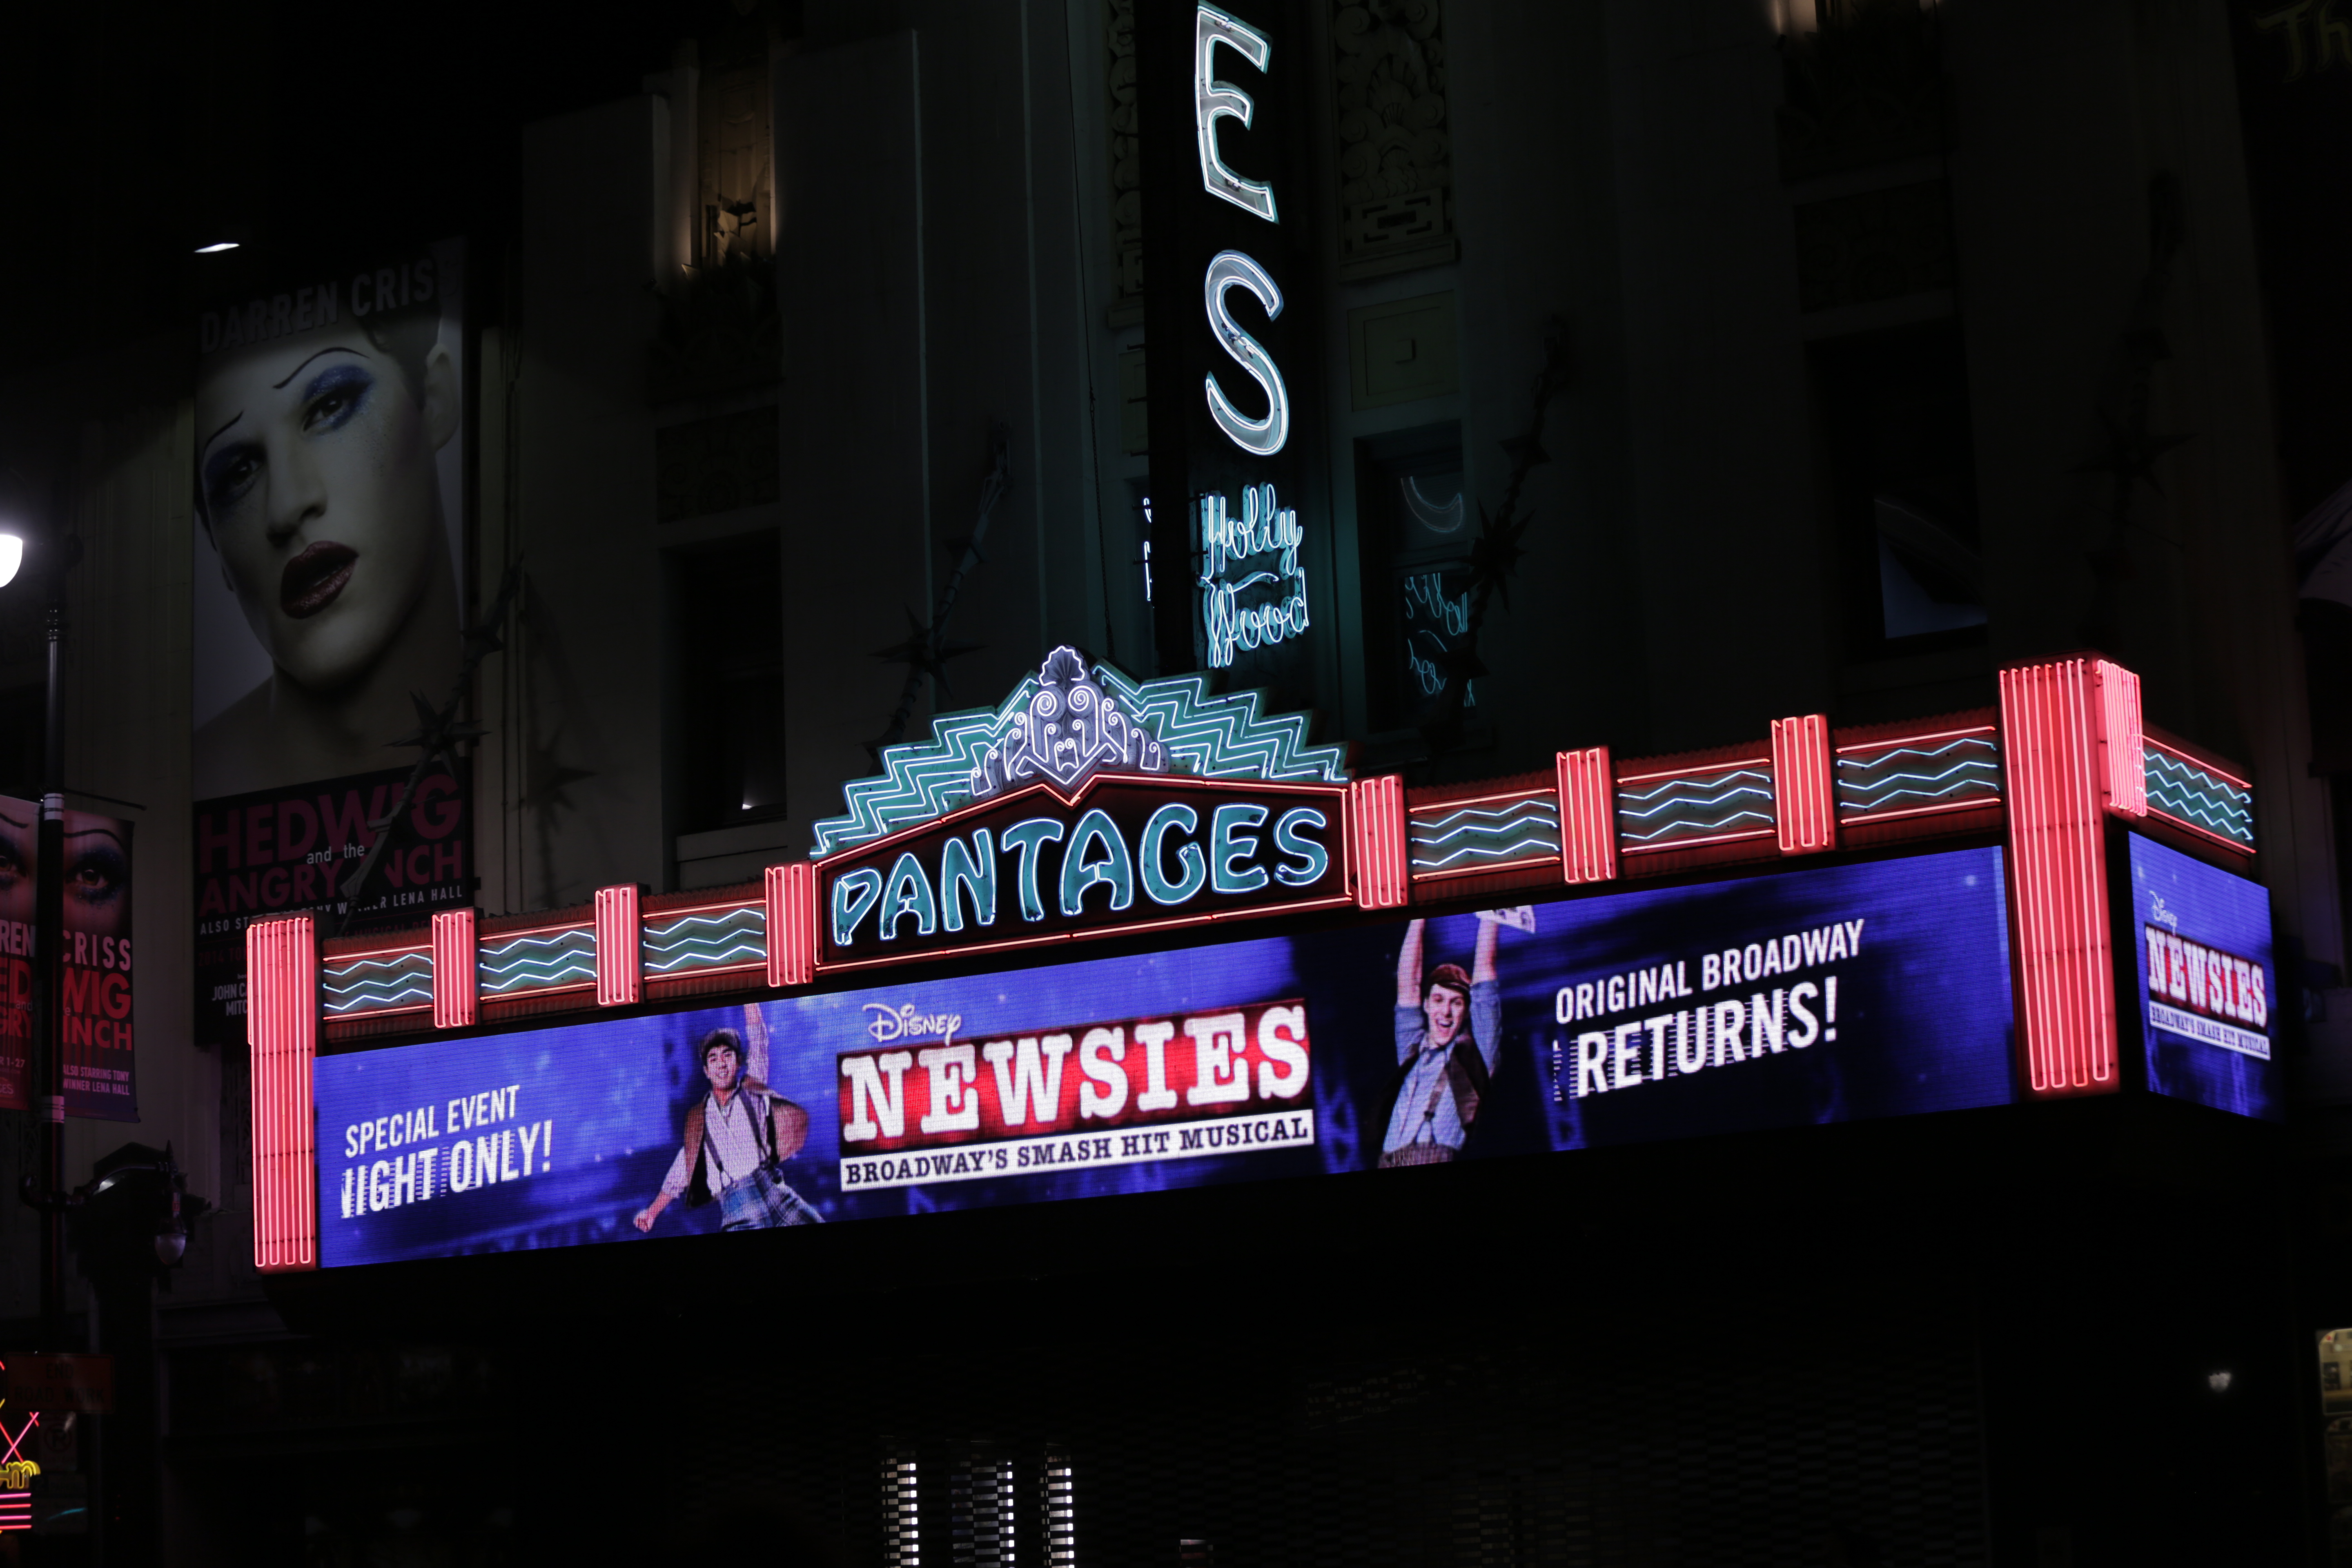 Tickets On Sale for Limited Run of Newsies at the Movies